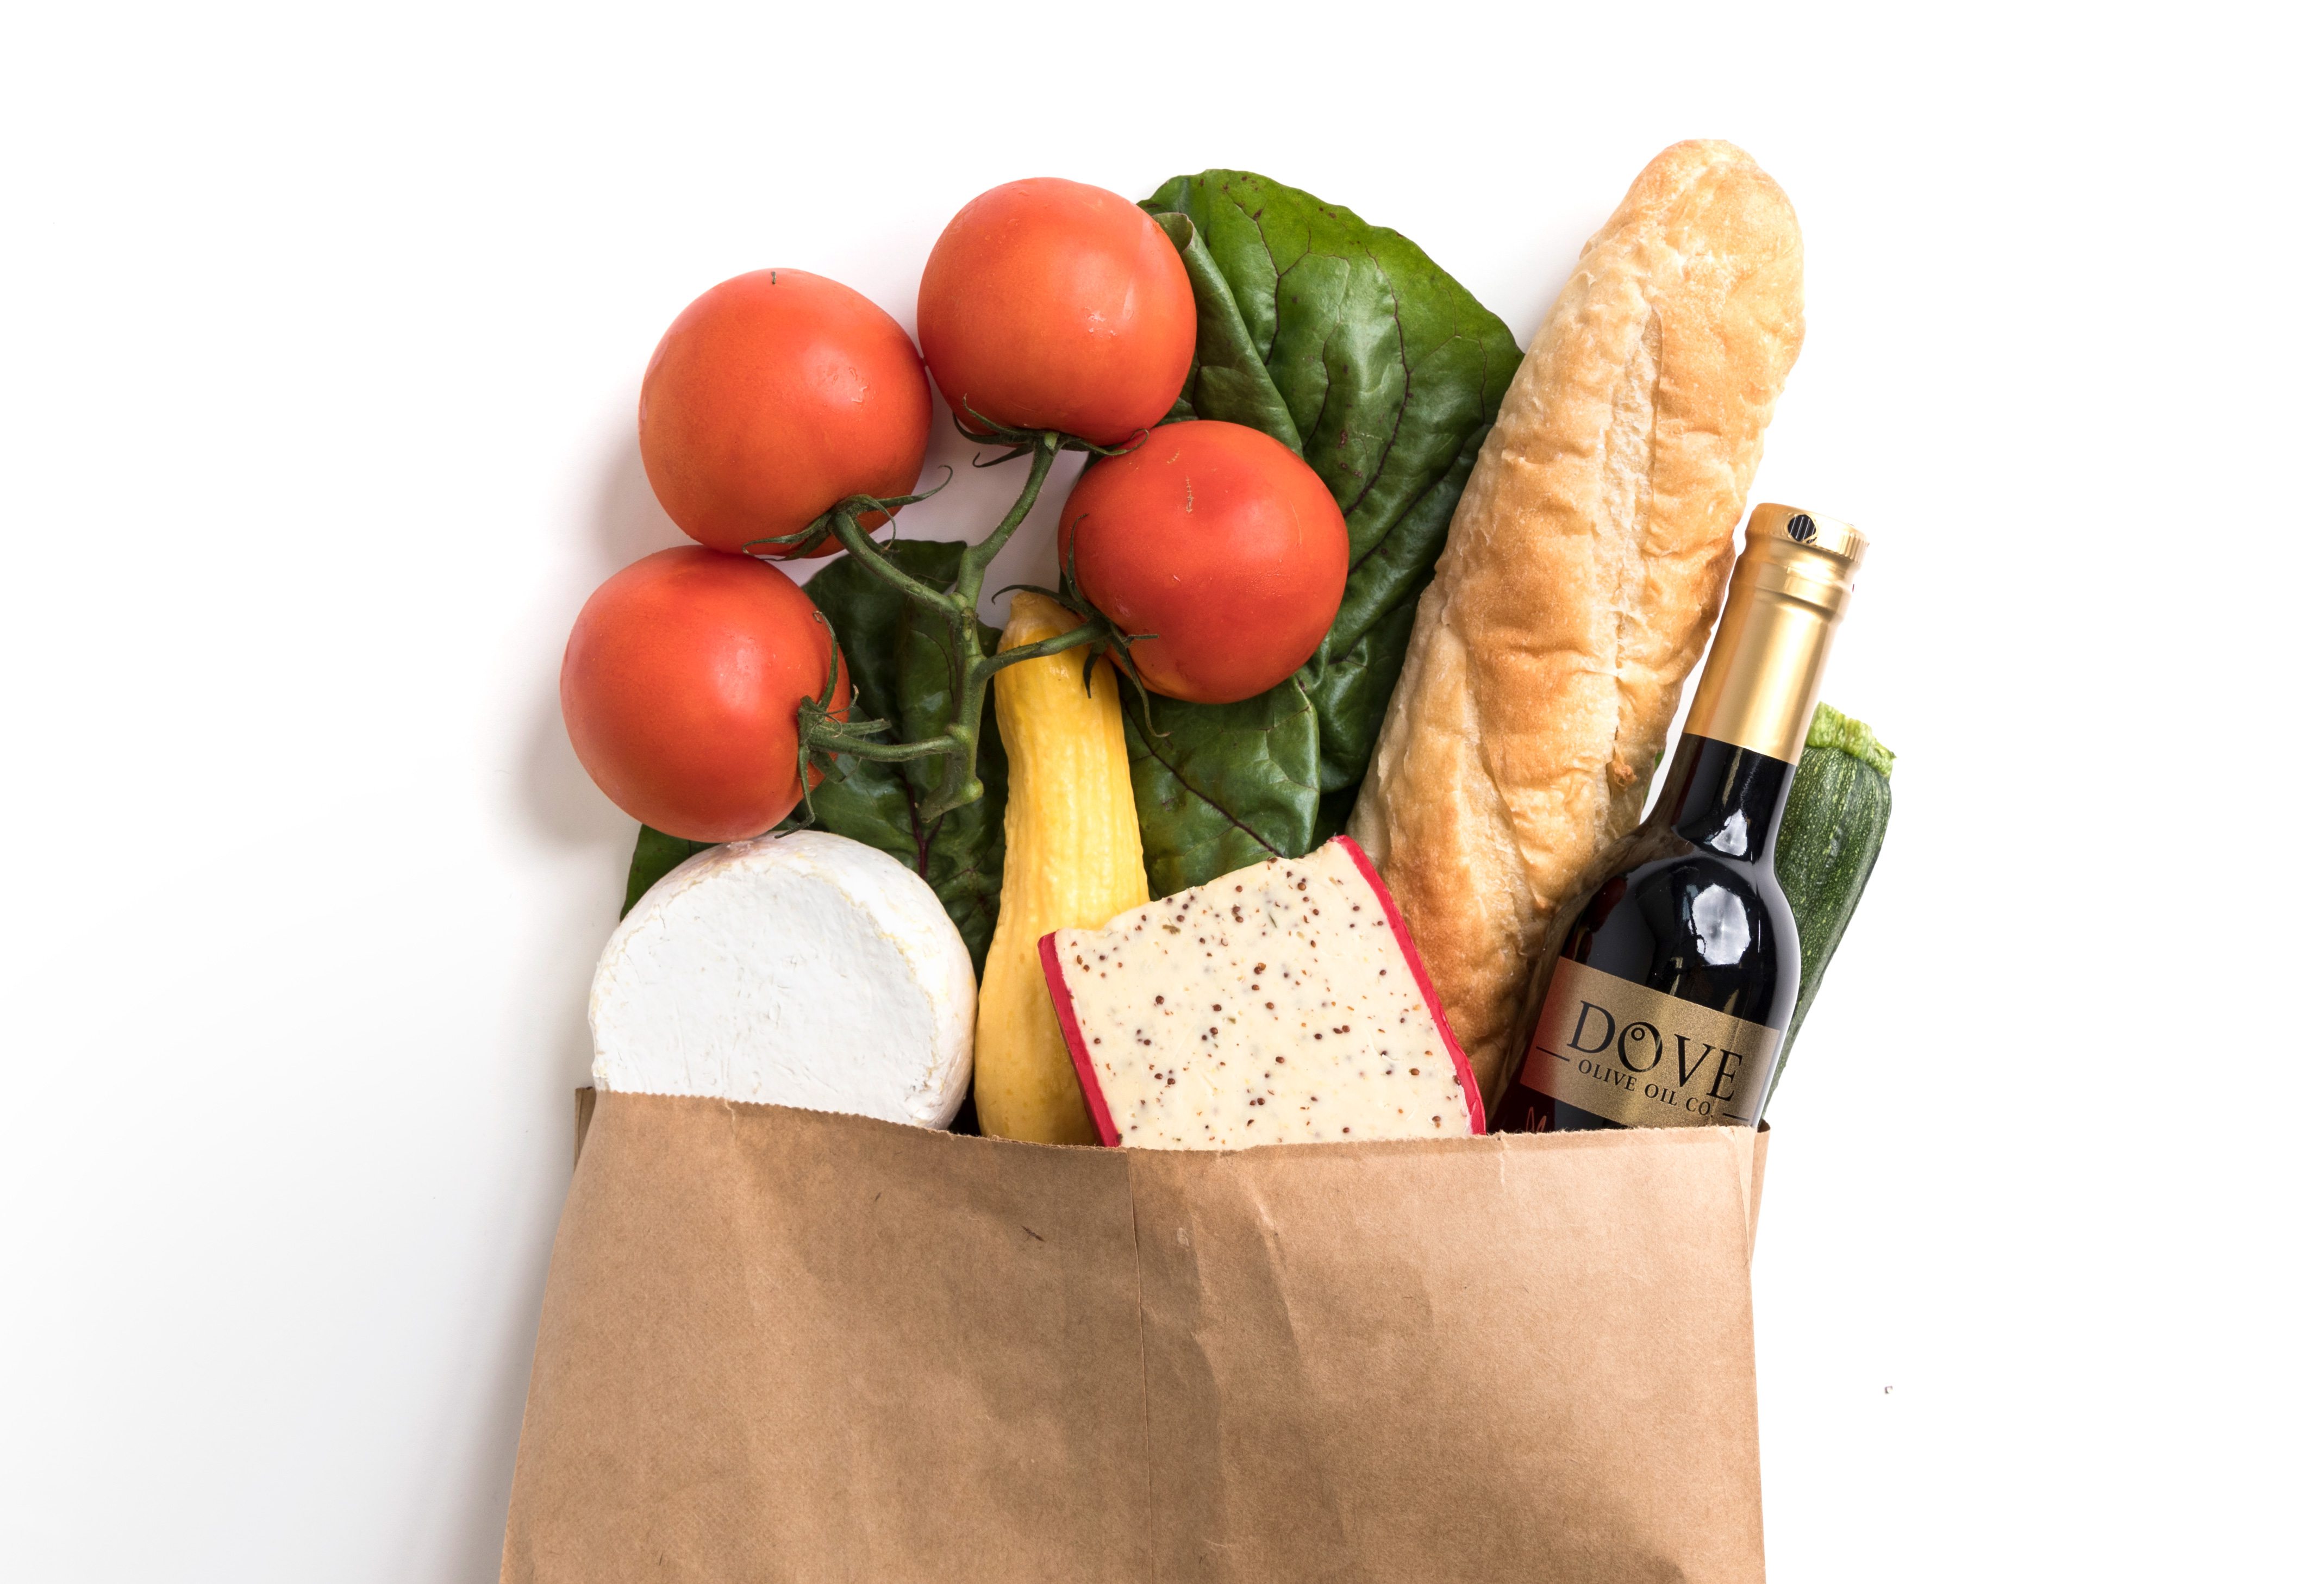 Paper grocery bag overflowing with produce